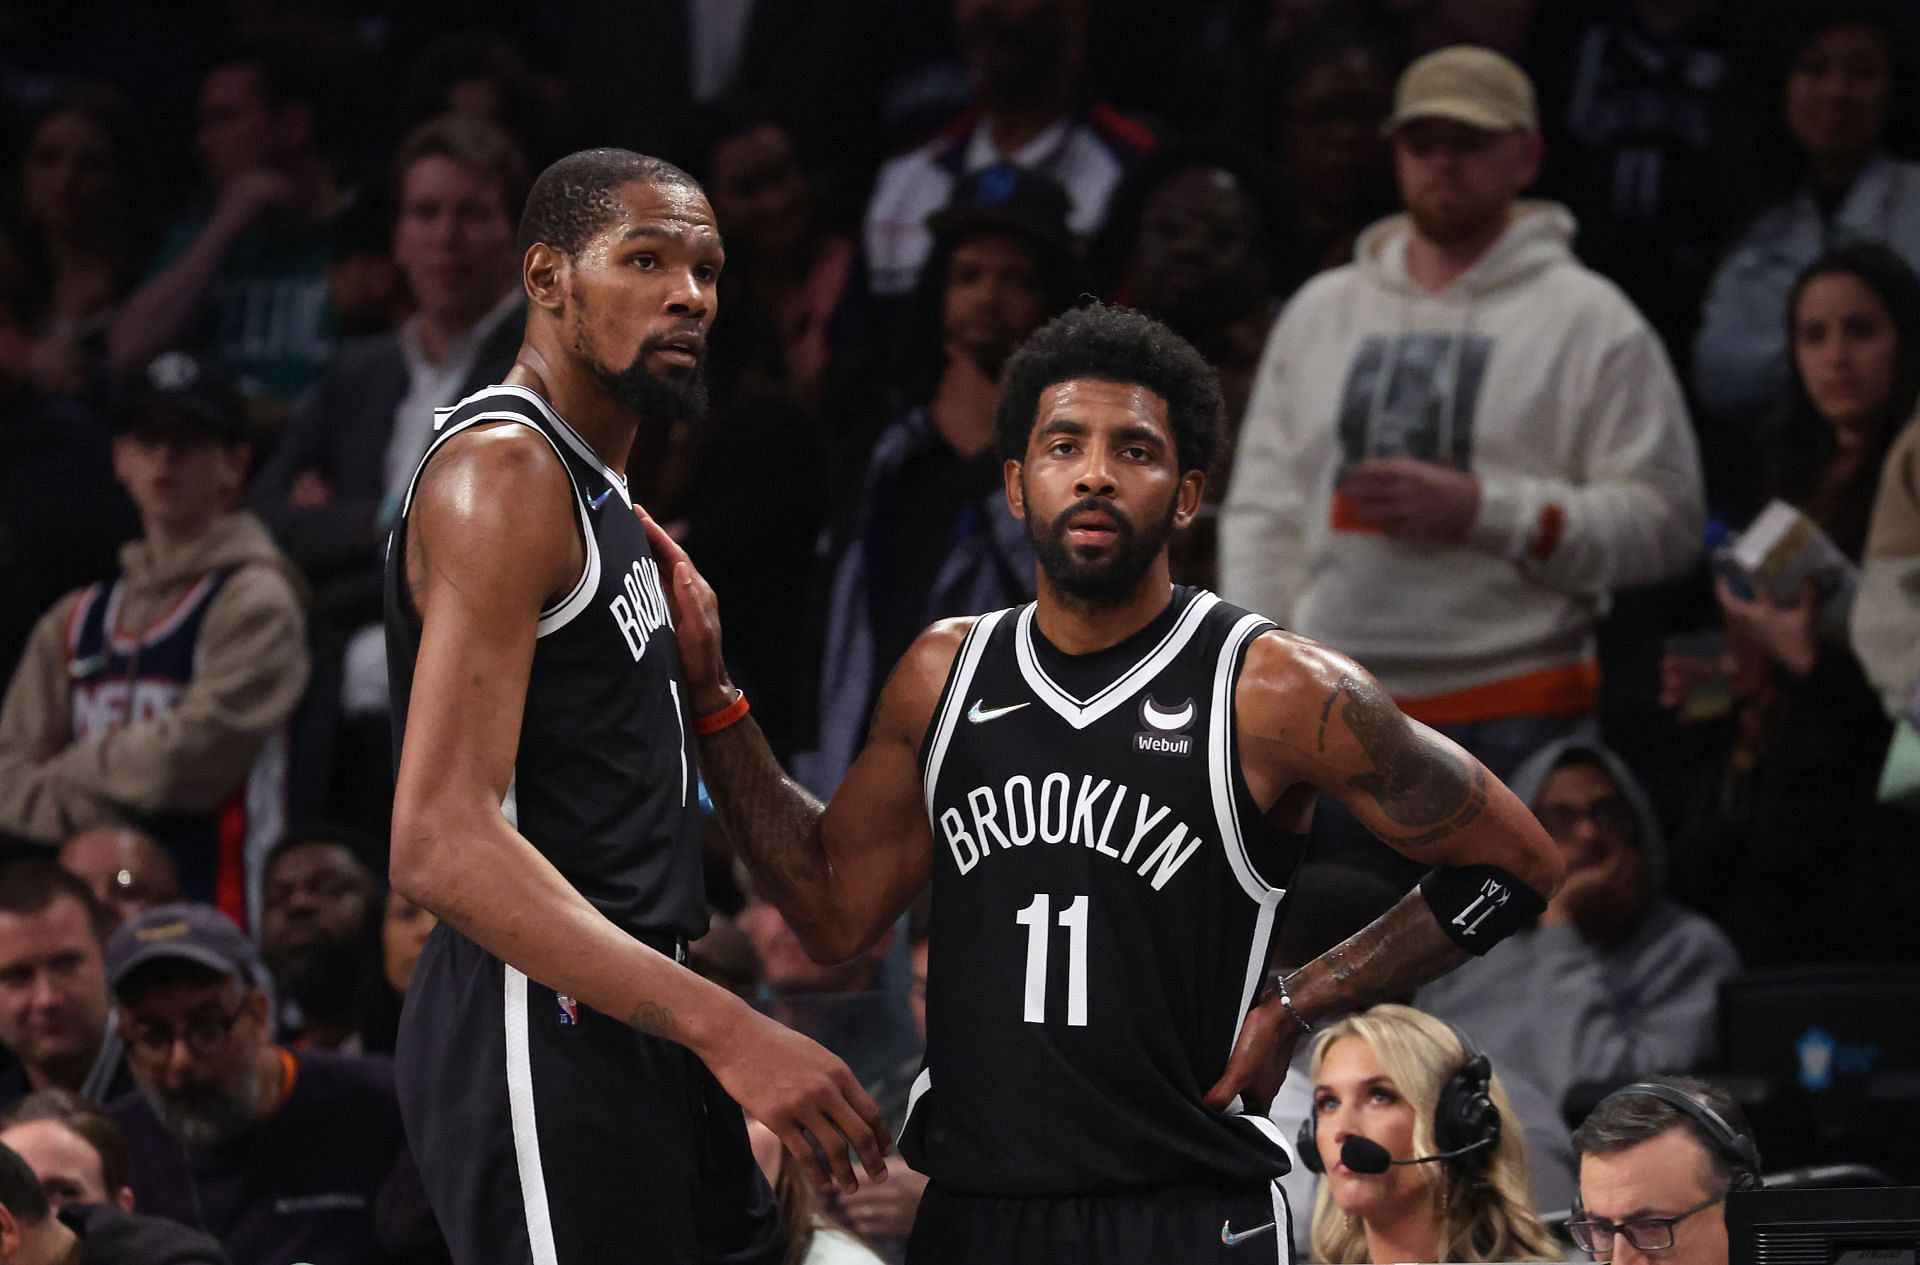 Kevin Durant and Kyrie Irving (11) of the Brooklyn Nets